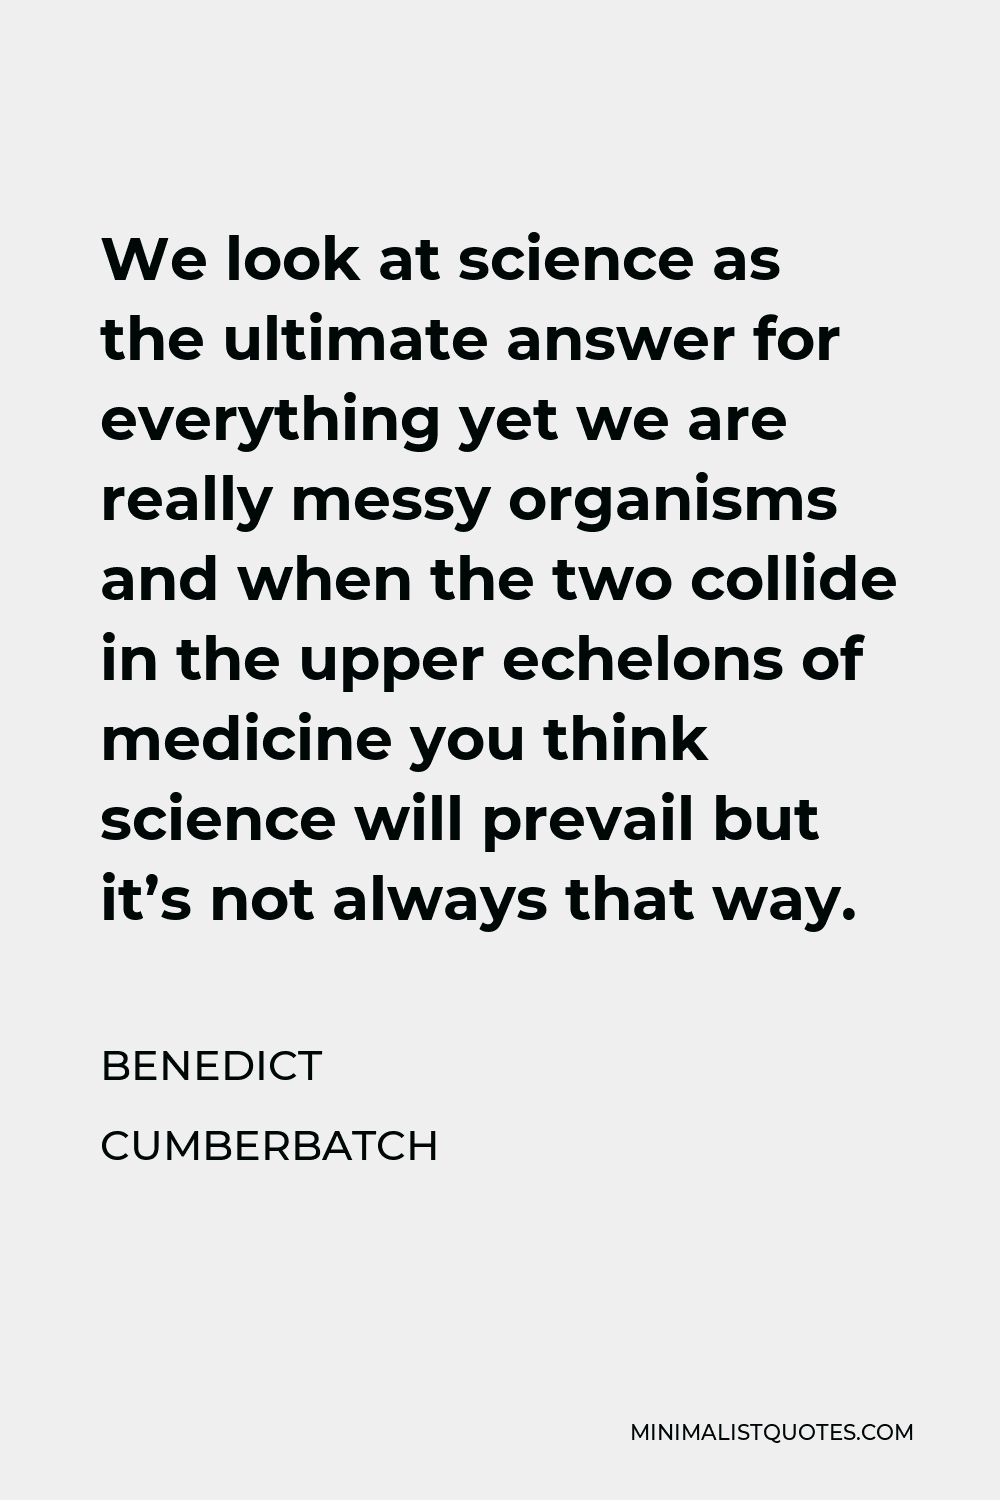 Benedict Cumberbatch Quote - We look at science as the ultimate answer for everything yet we are really messy organisms and when the two collide in the upper echelons of medicine you think science will prevail but it’s not always that way.